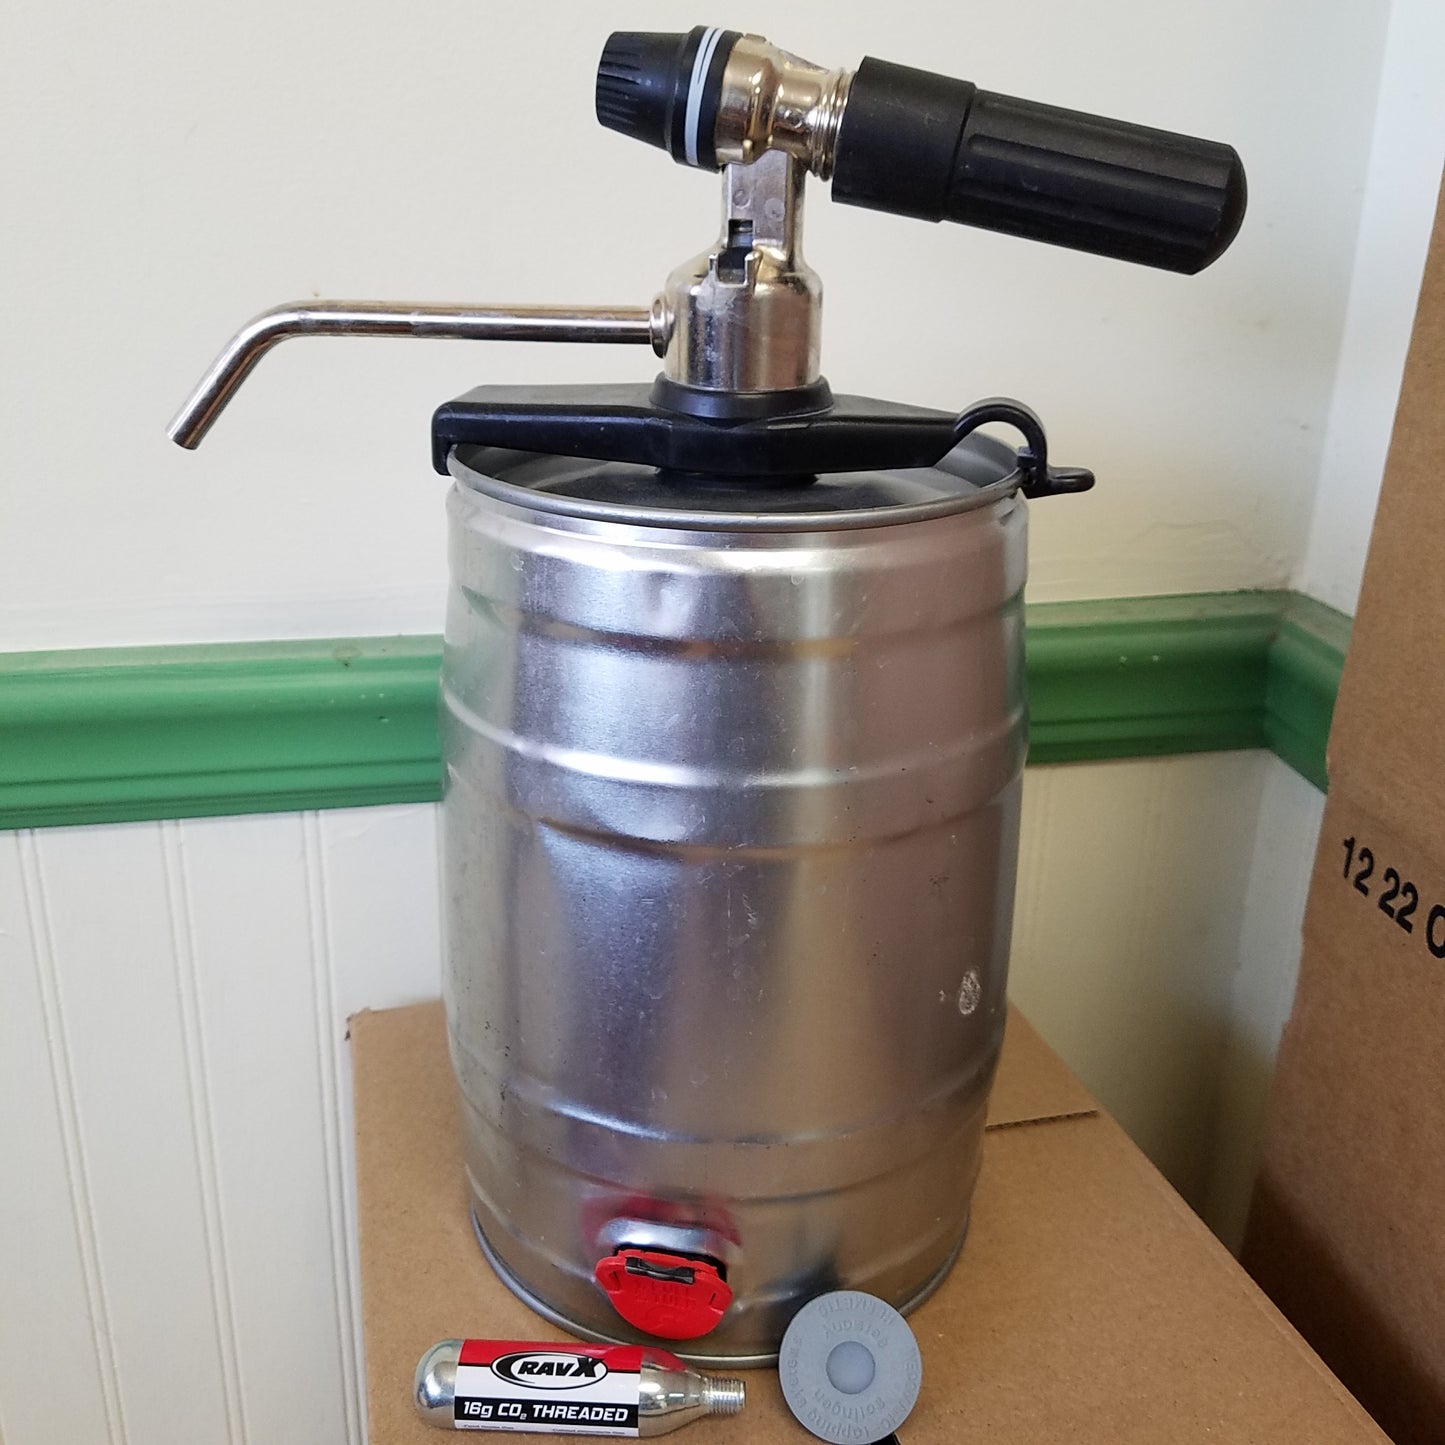 Party Star Keg Whole Package Bundle includes the Keg, the Tap, a Two Piece Bung, and a Co2 Cartridge